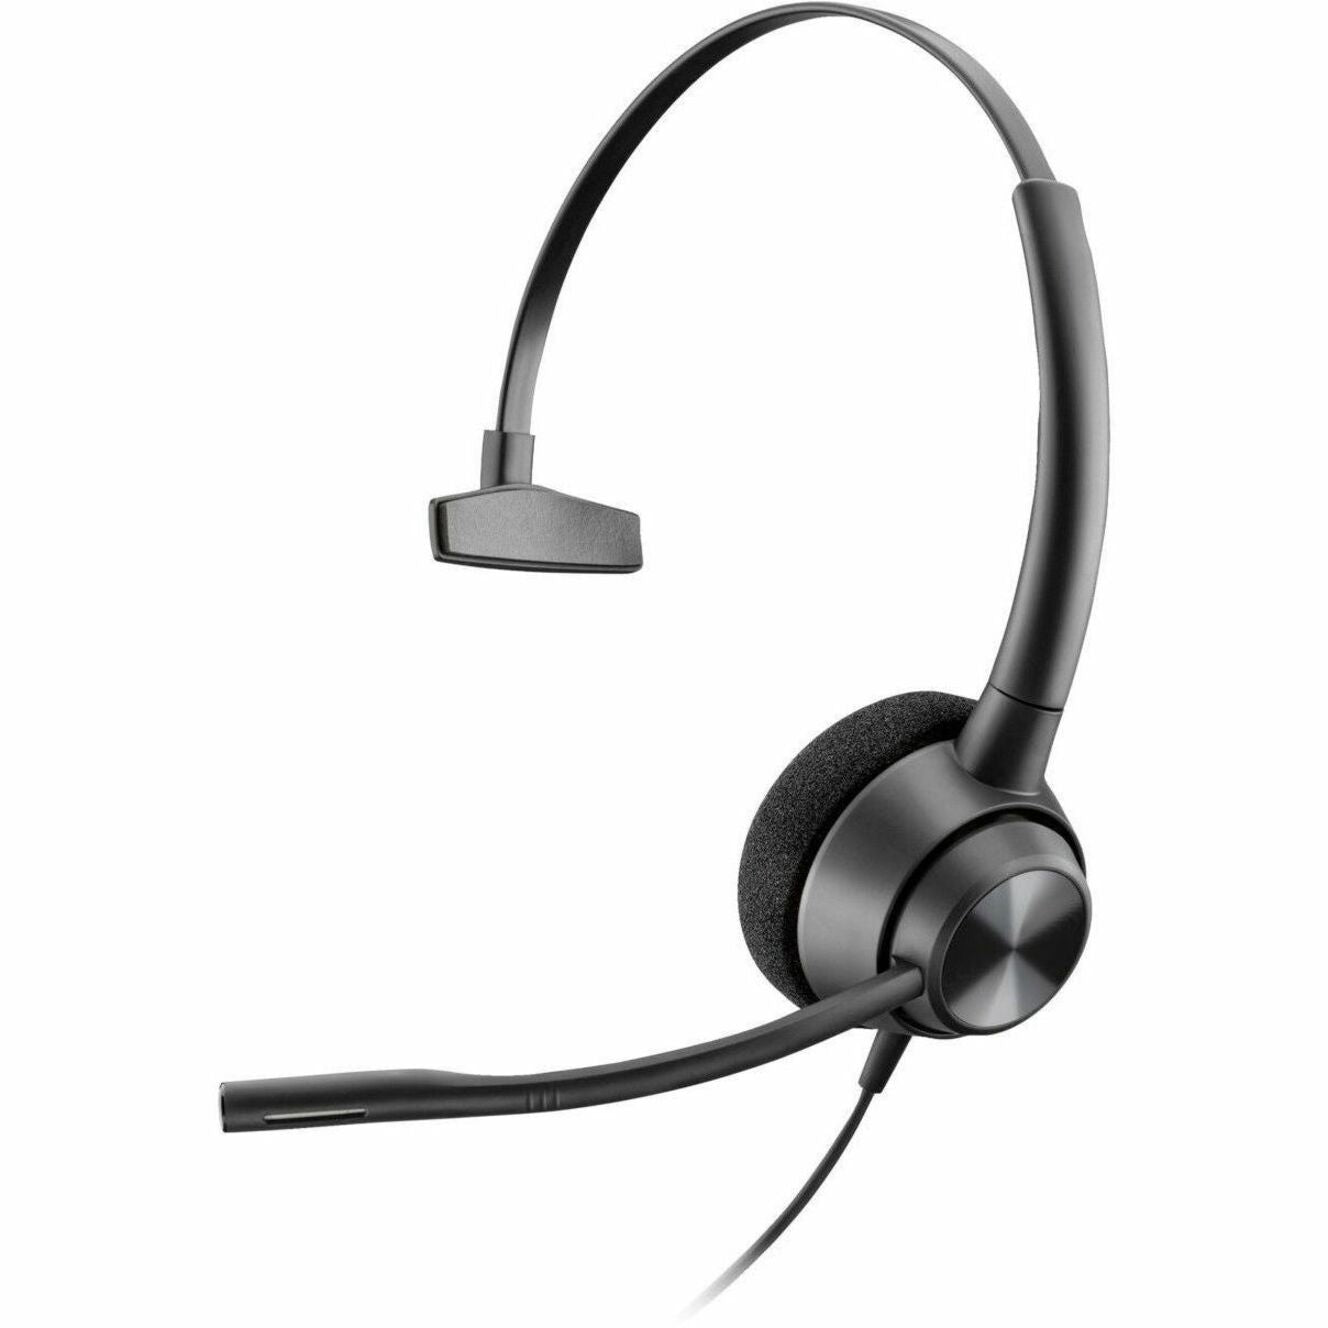 HP 77T43AA EncorePro 310 Headset, Comfortable, Noise Cancelling, Wideband Audio, 2 Year Warranty